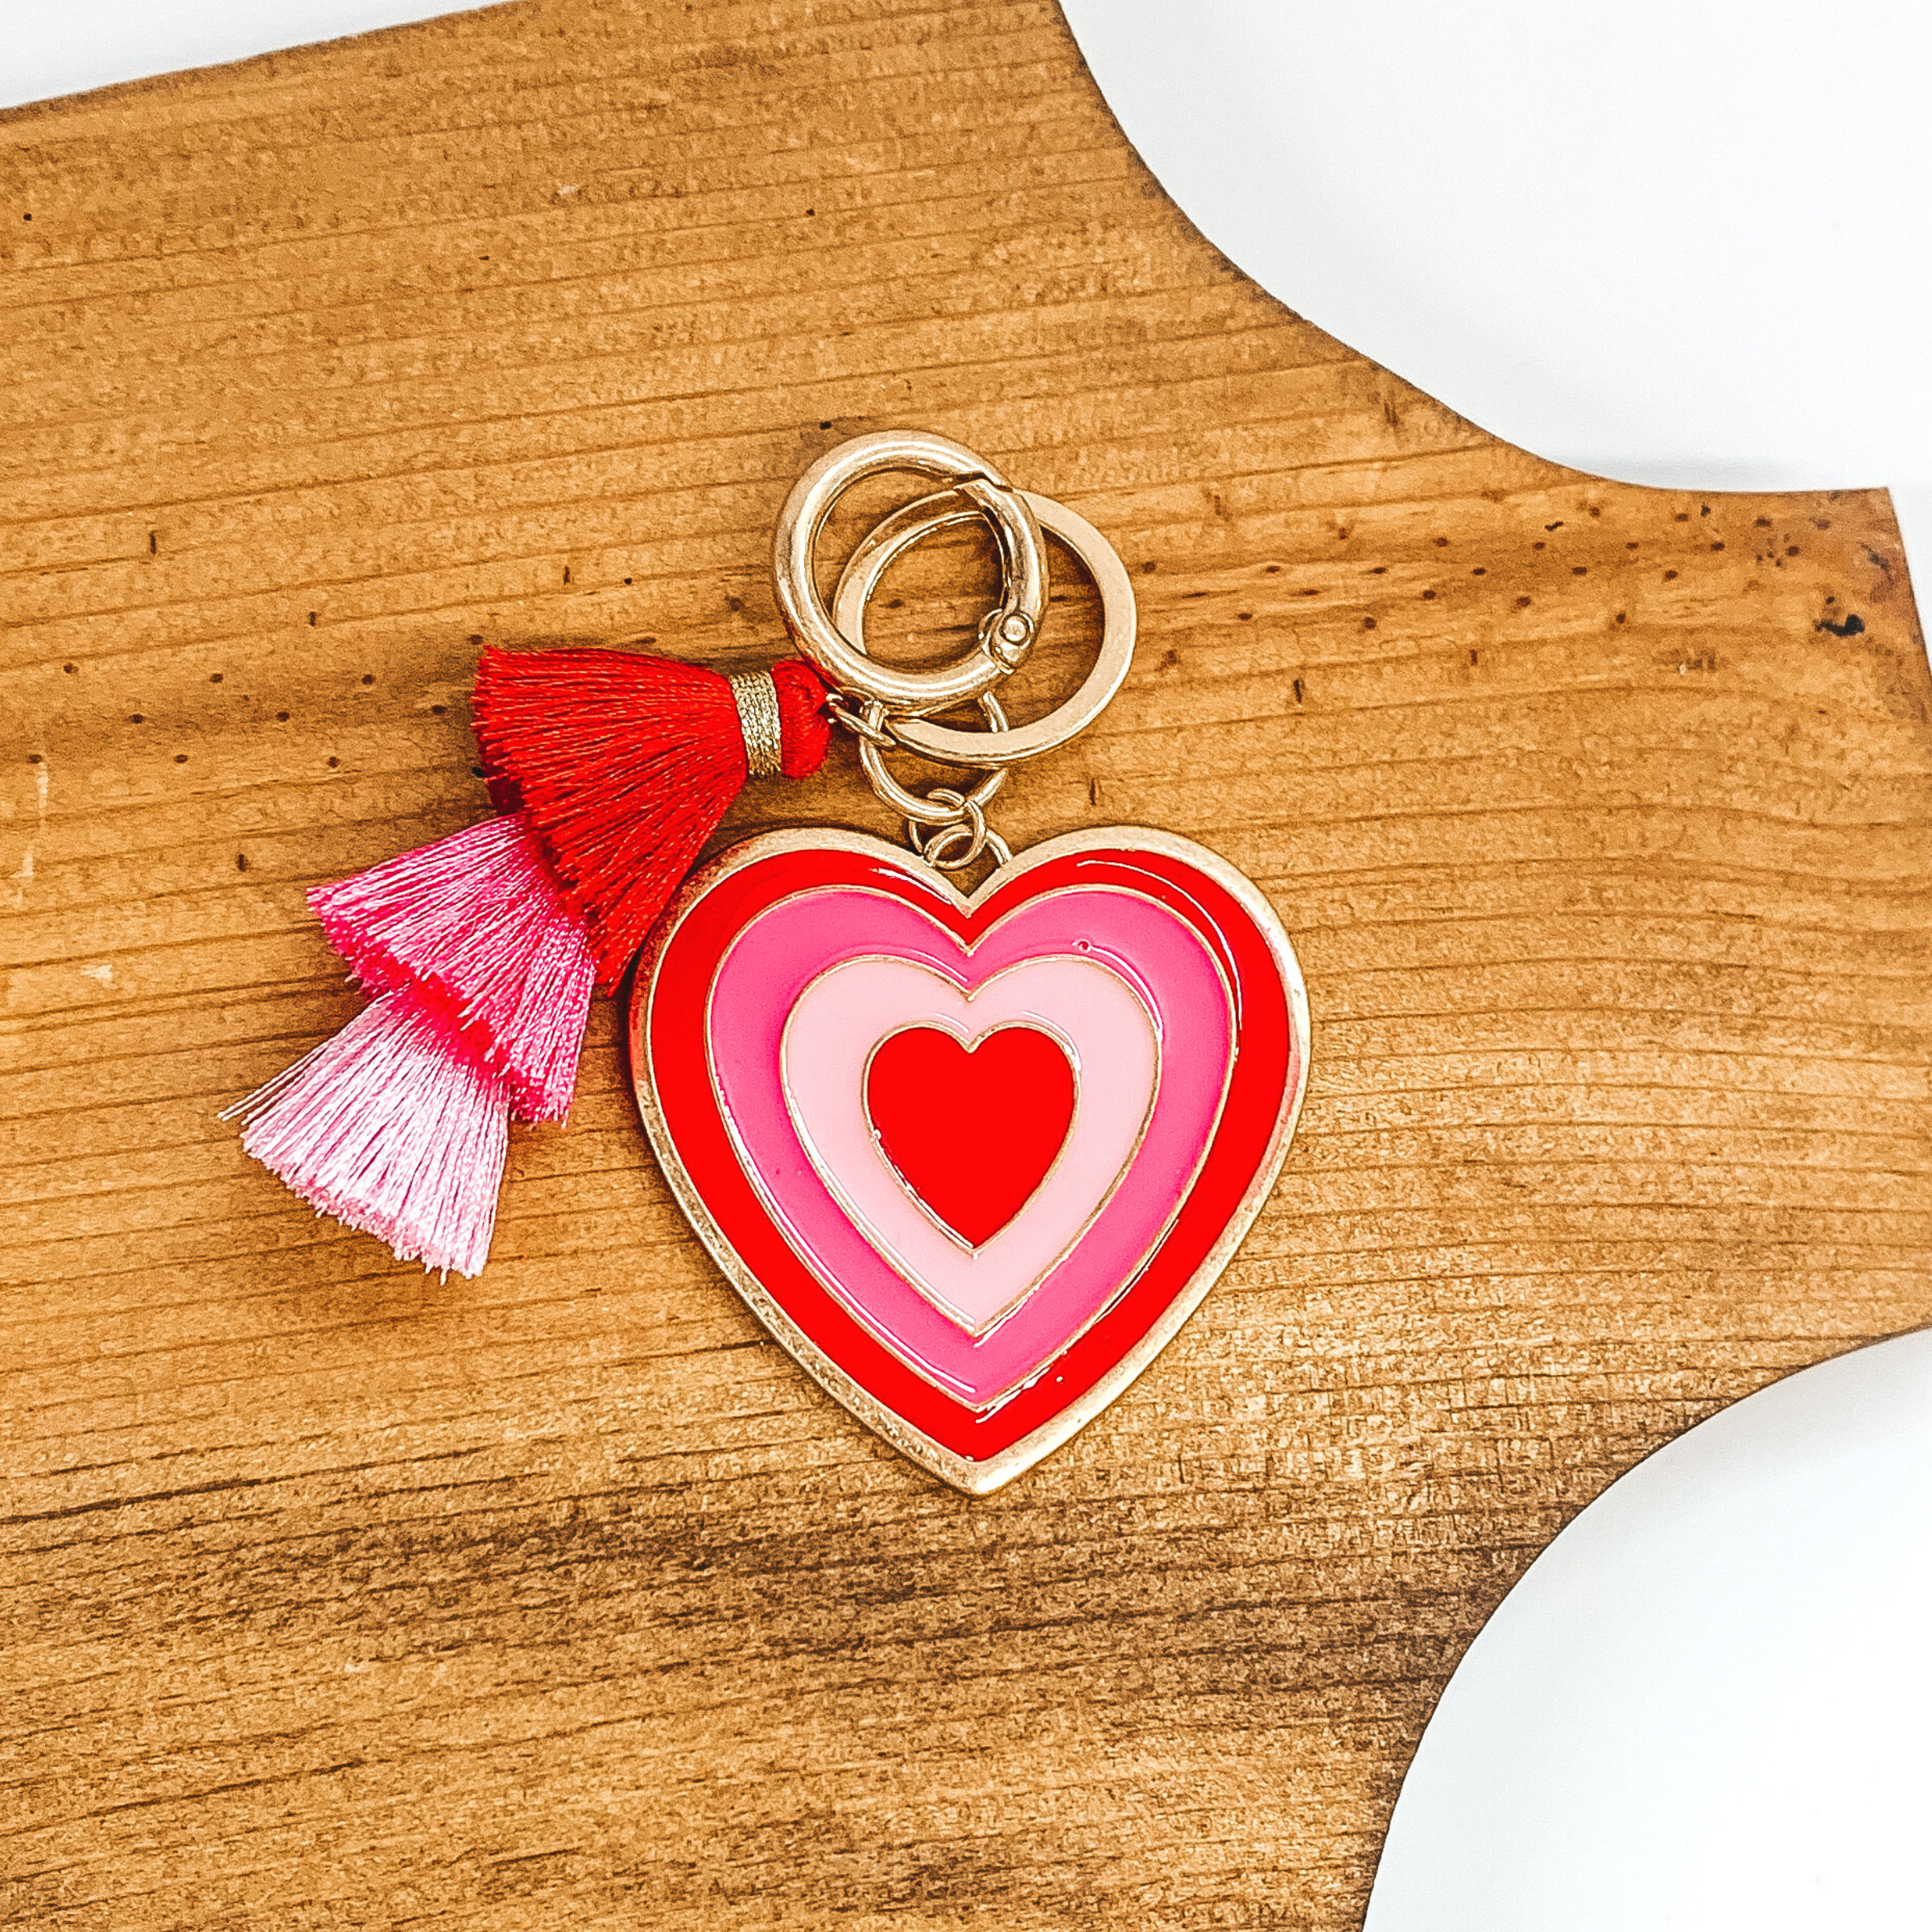 Gold heart pendant key chain with a tassel in that include the colors red, pink, and light pink. One side of the heart includes layers of hearts that includes the colors red, pink, and light pink. The other side is gold with an engraved outline in black and "xoxo' engraved in black. This key chain is pictured laying on a tan block on a white background. 